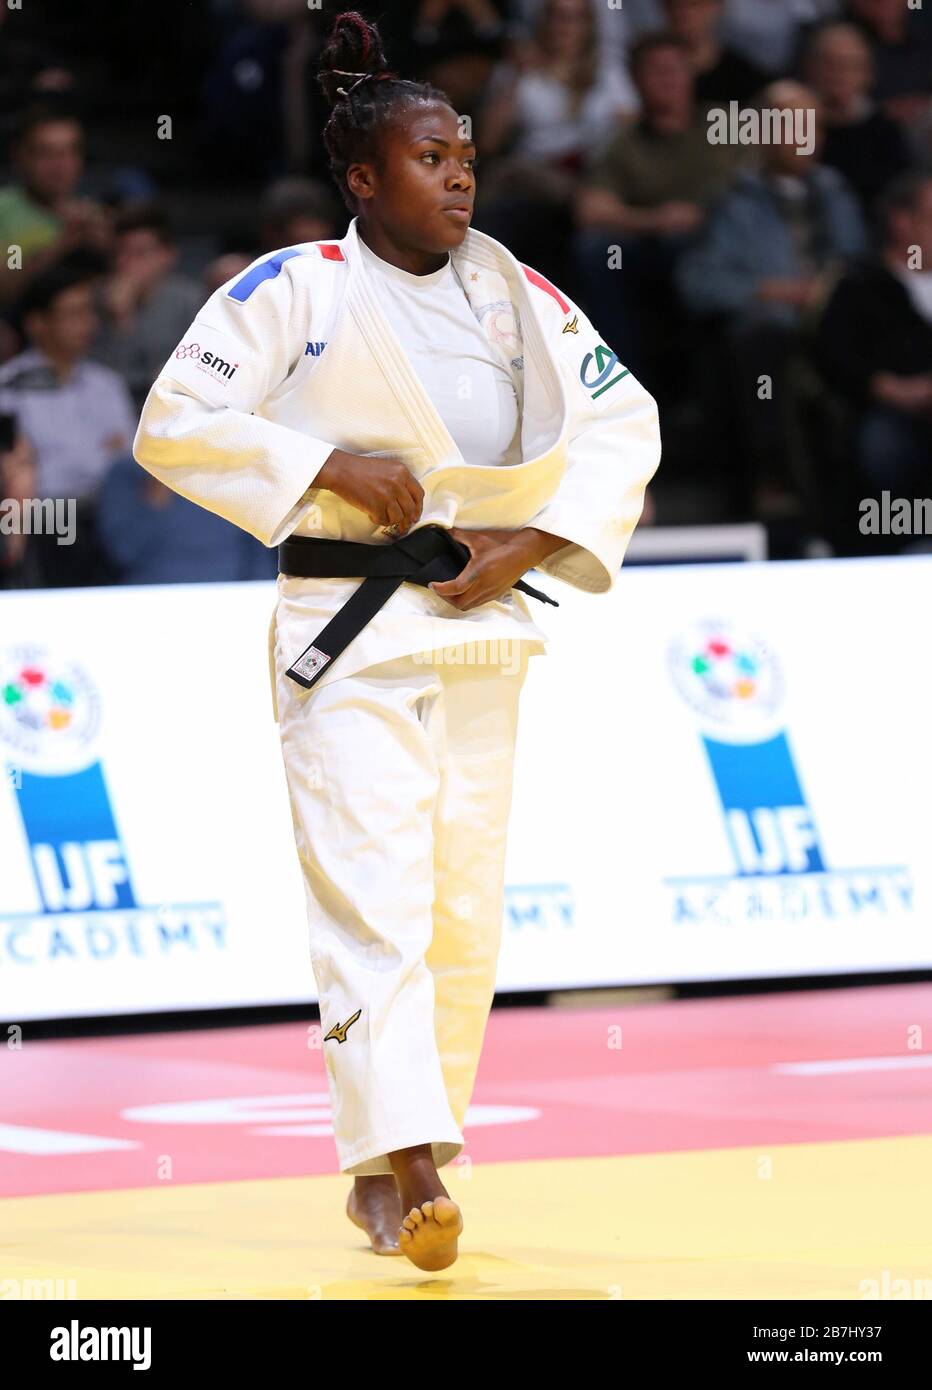 Paris, France - 08th Feb, 2020: Clarisse Agbegnenou for France against Beauchemin-Pinard for Canada, Women's -63 kg, Quarter-final (Credit: Mickael Chavet) Stock Photo